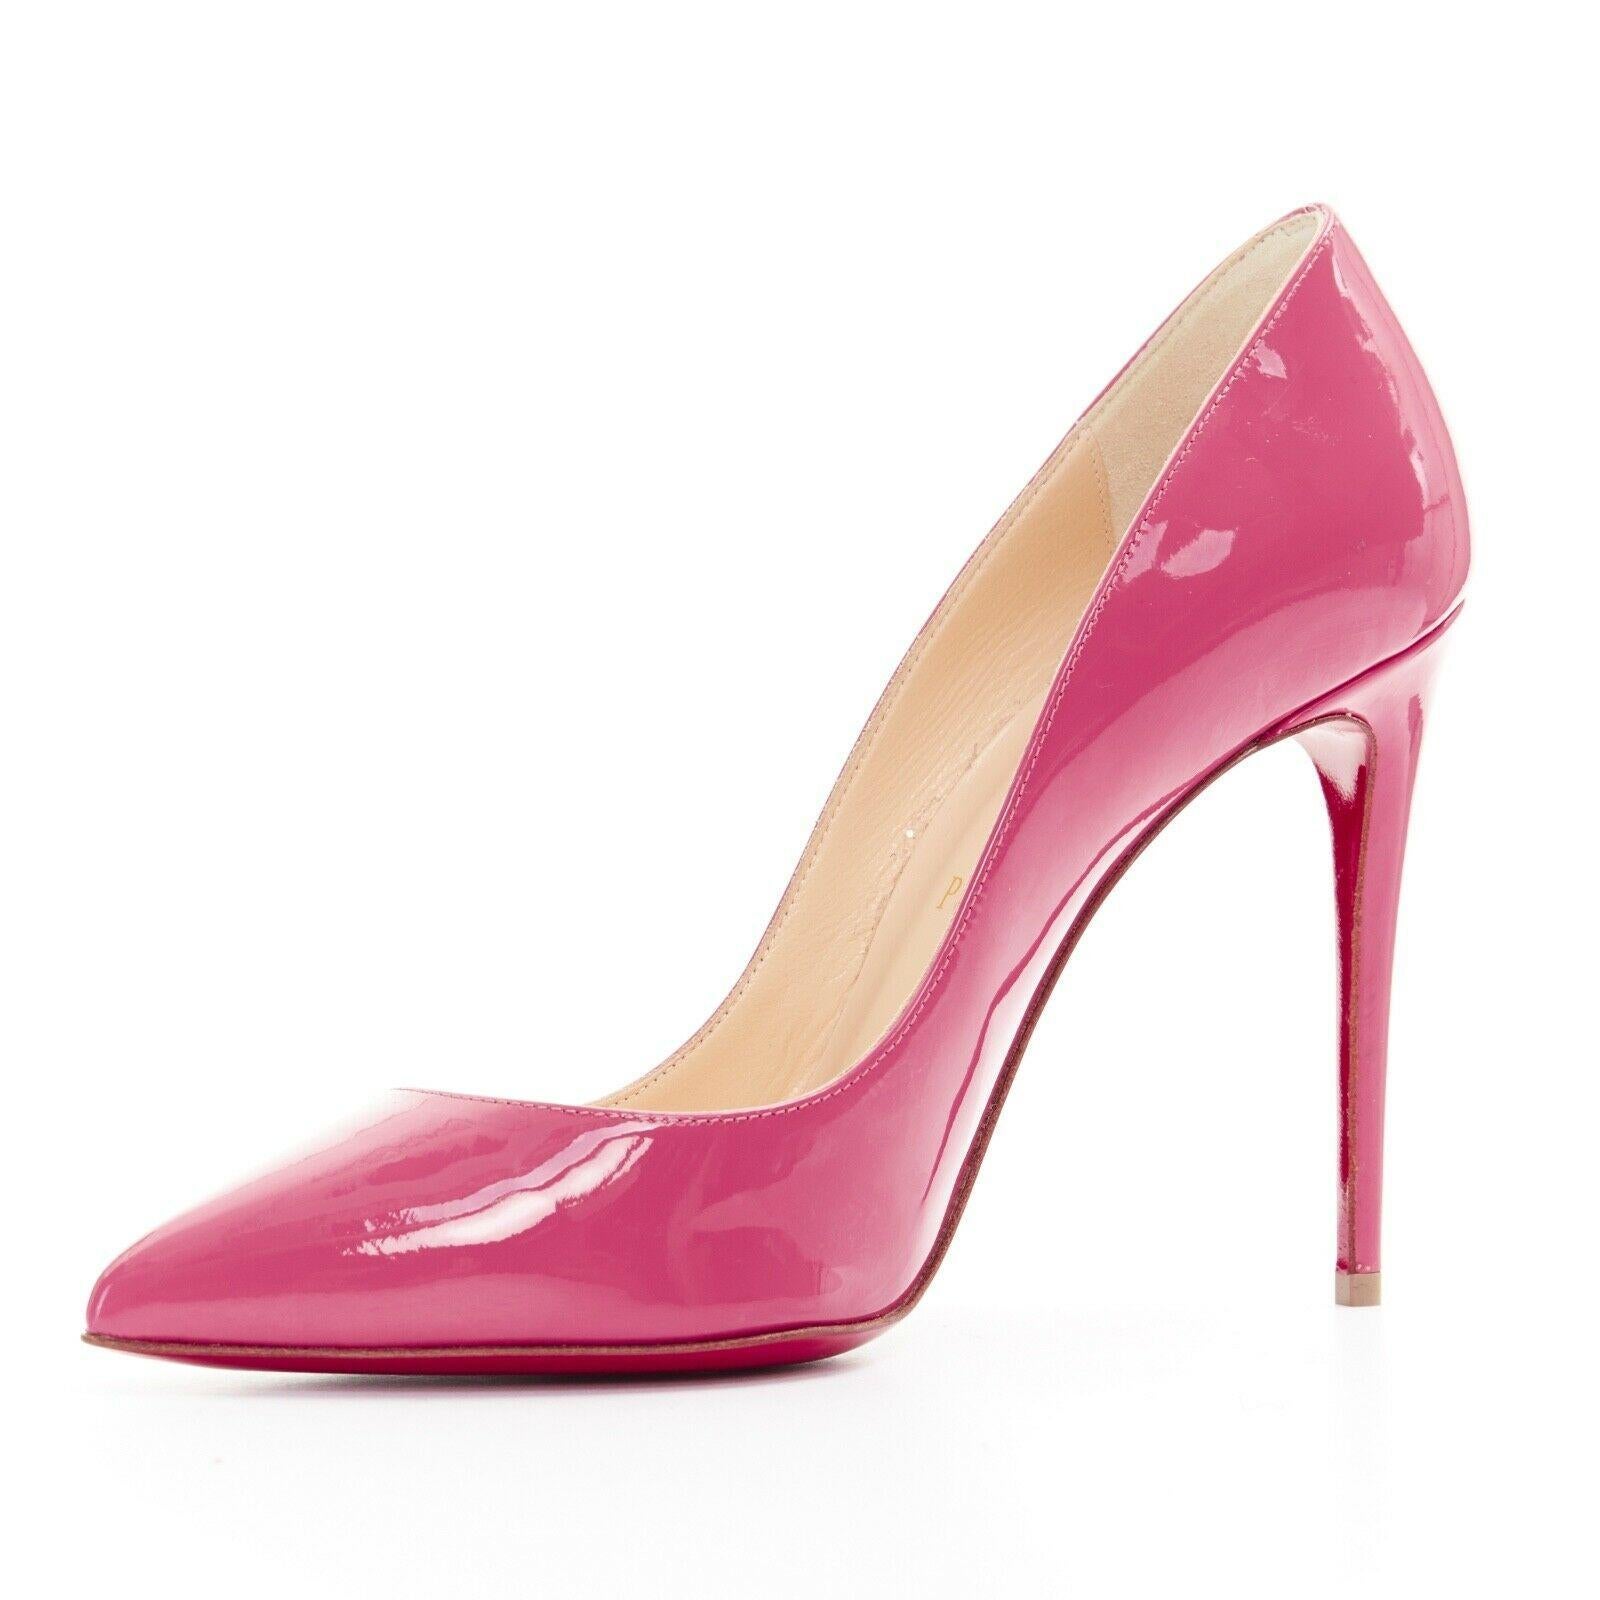 Pink new CHRISTIAN LOUBOUTIN Pigalle Follies 100 pink patent pointed toe pumps EU37